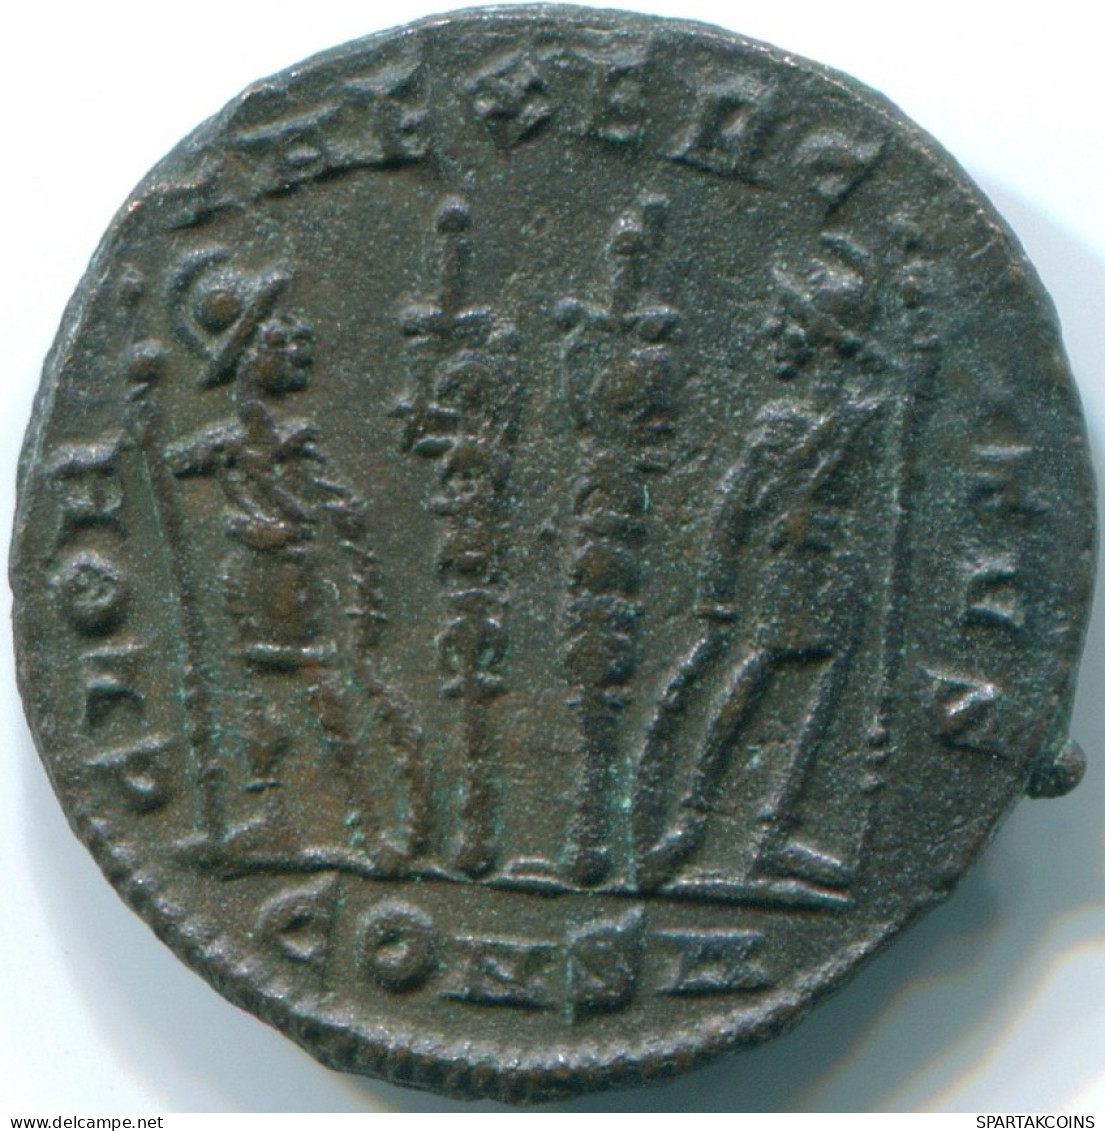 CONSTANTINUS I MAGNUS Two Soldier Standing 2.30g/17.54mm #ROM1016.8.D.A - El Impero Christiano (307 / 363)